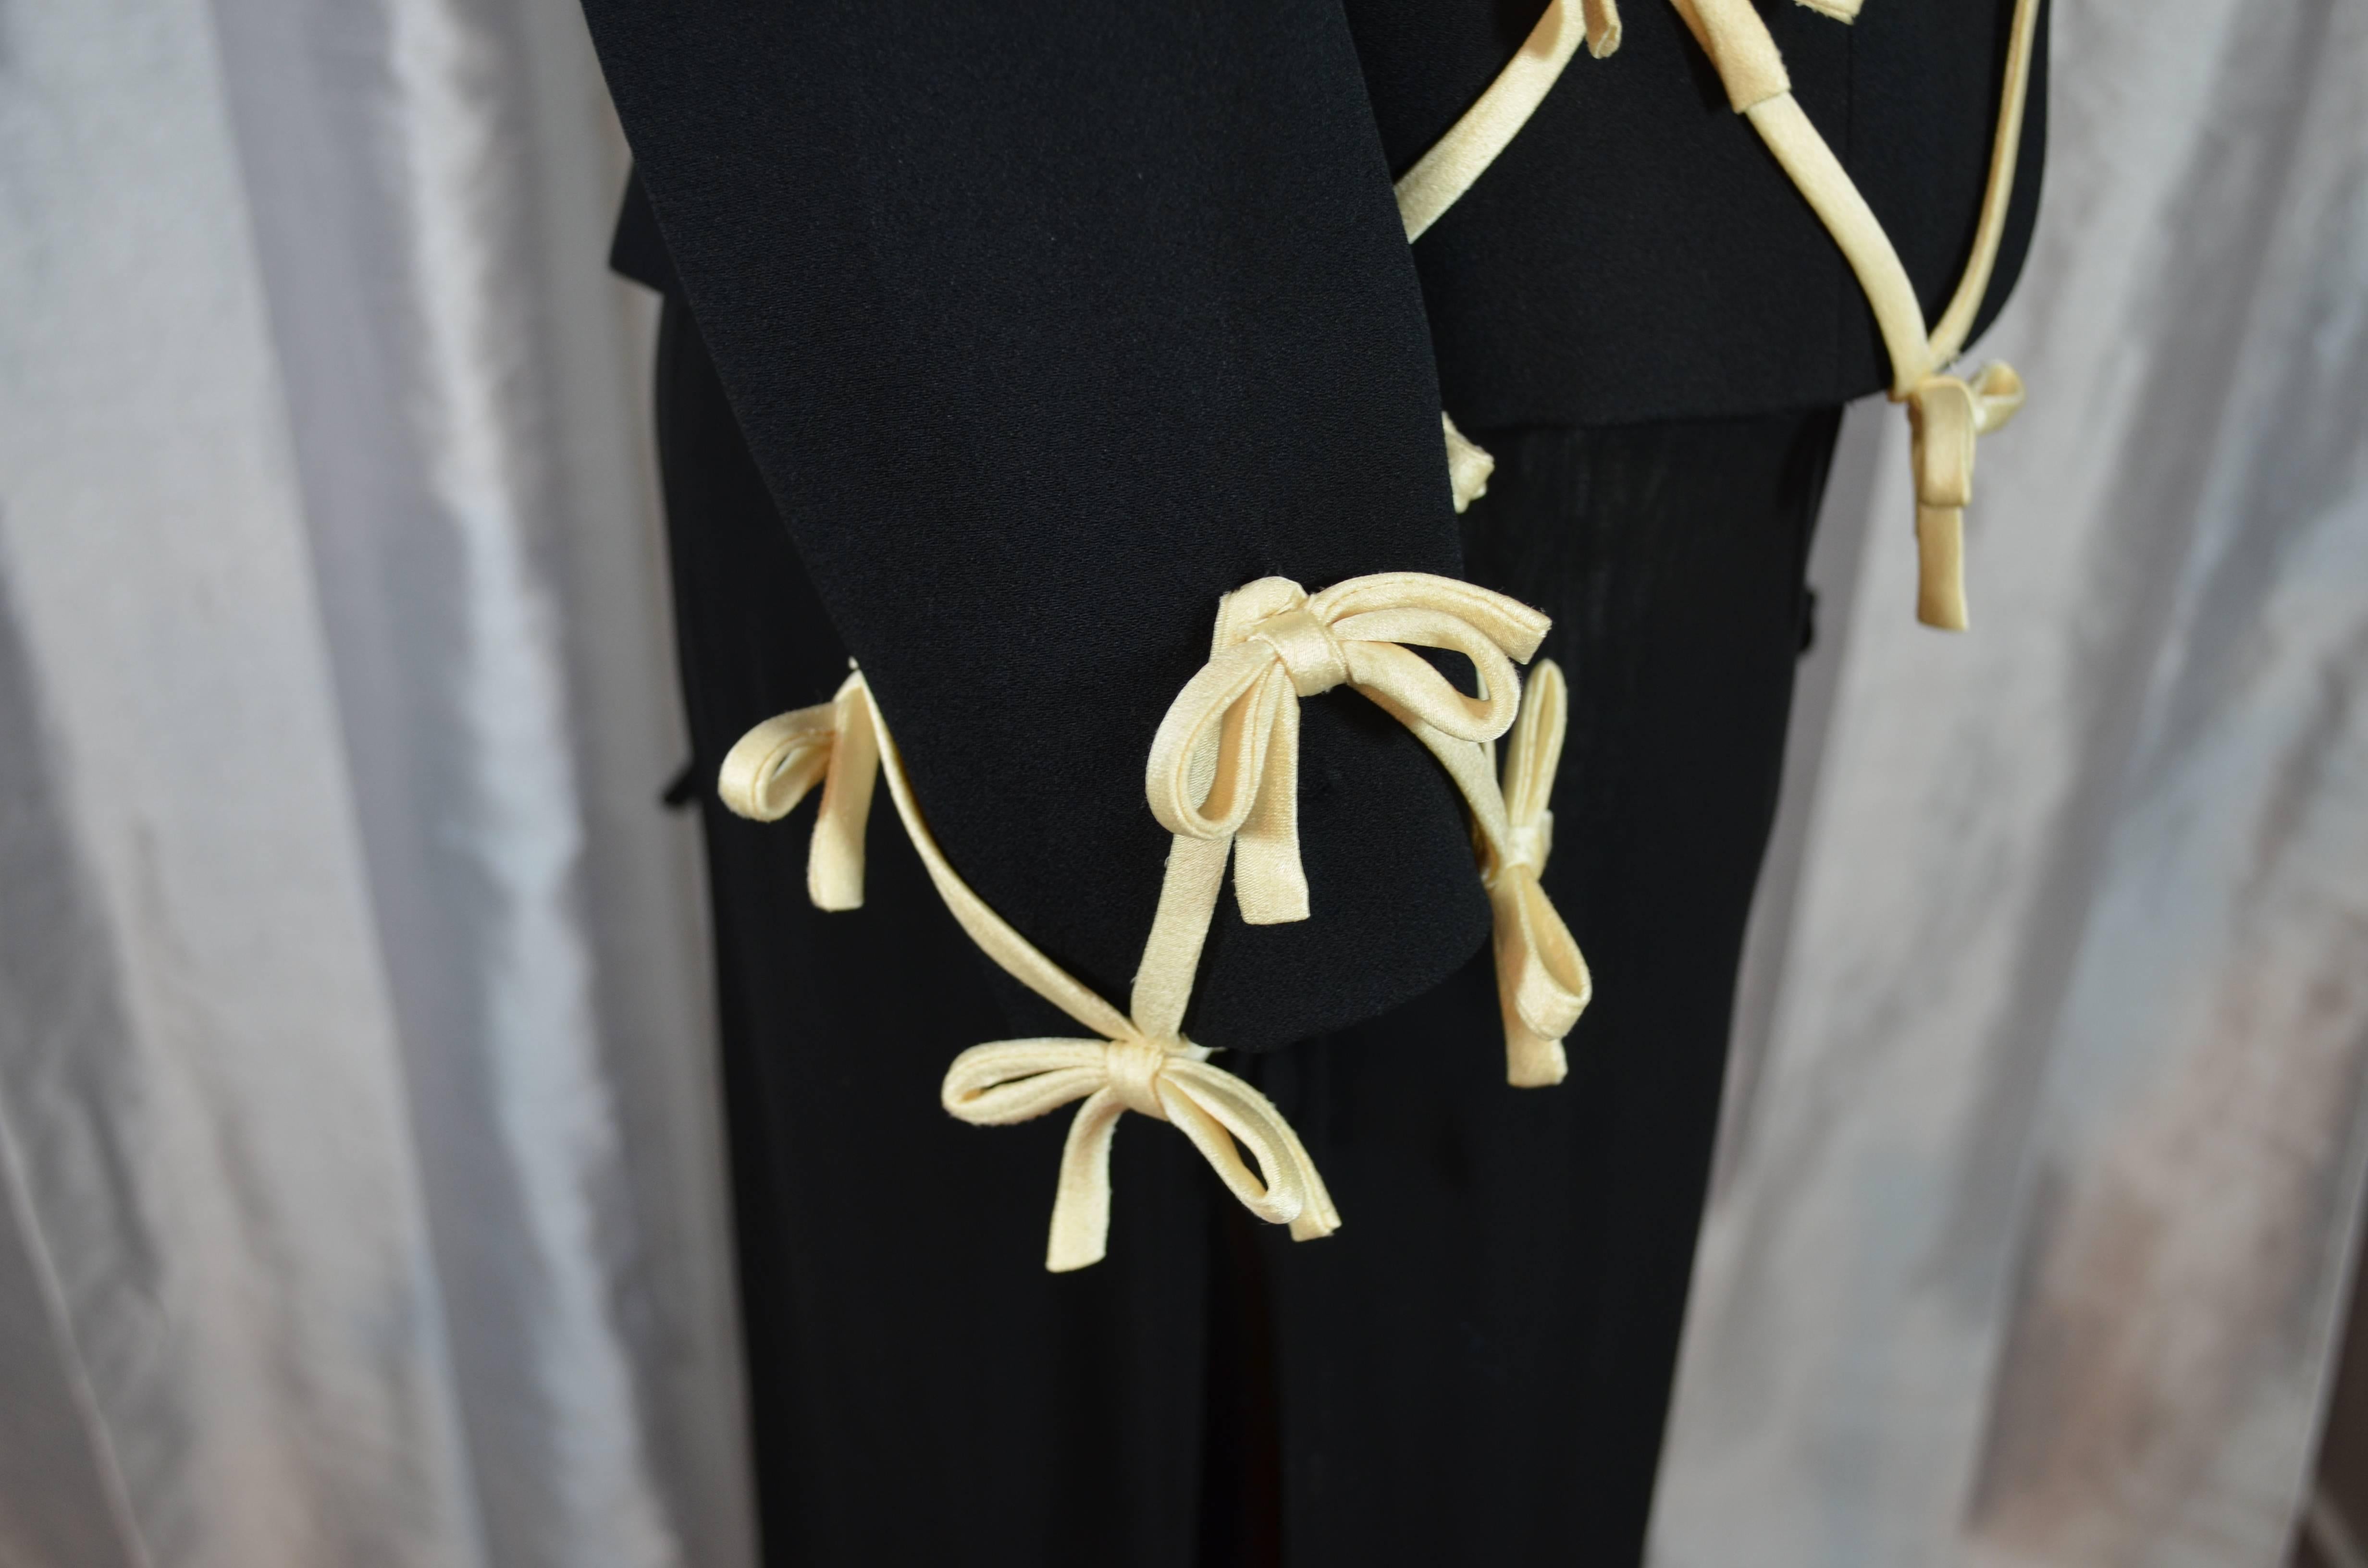 Moschino Cheap and Chic 3 Piece Bow Embellished Pants Suit

Jacket:
Black crepe open front jacket with cream satin lattice bow embellishments on the front and at the sleeve cuffs. Fully lined. Labeled a US size 6. Excellent condition. Fabric 79%